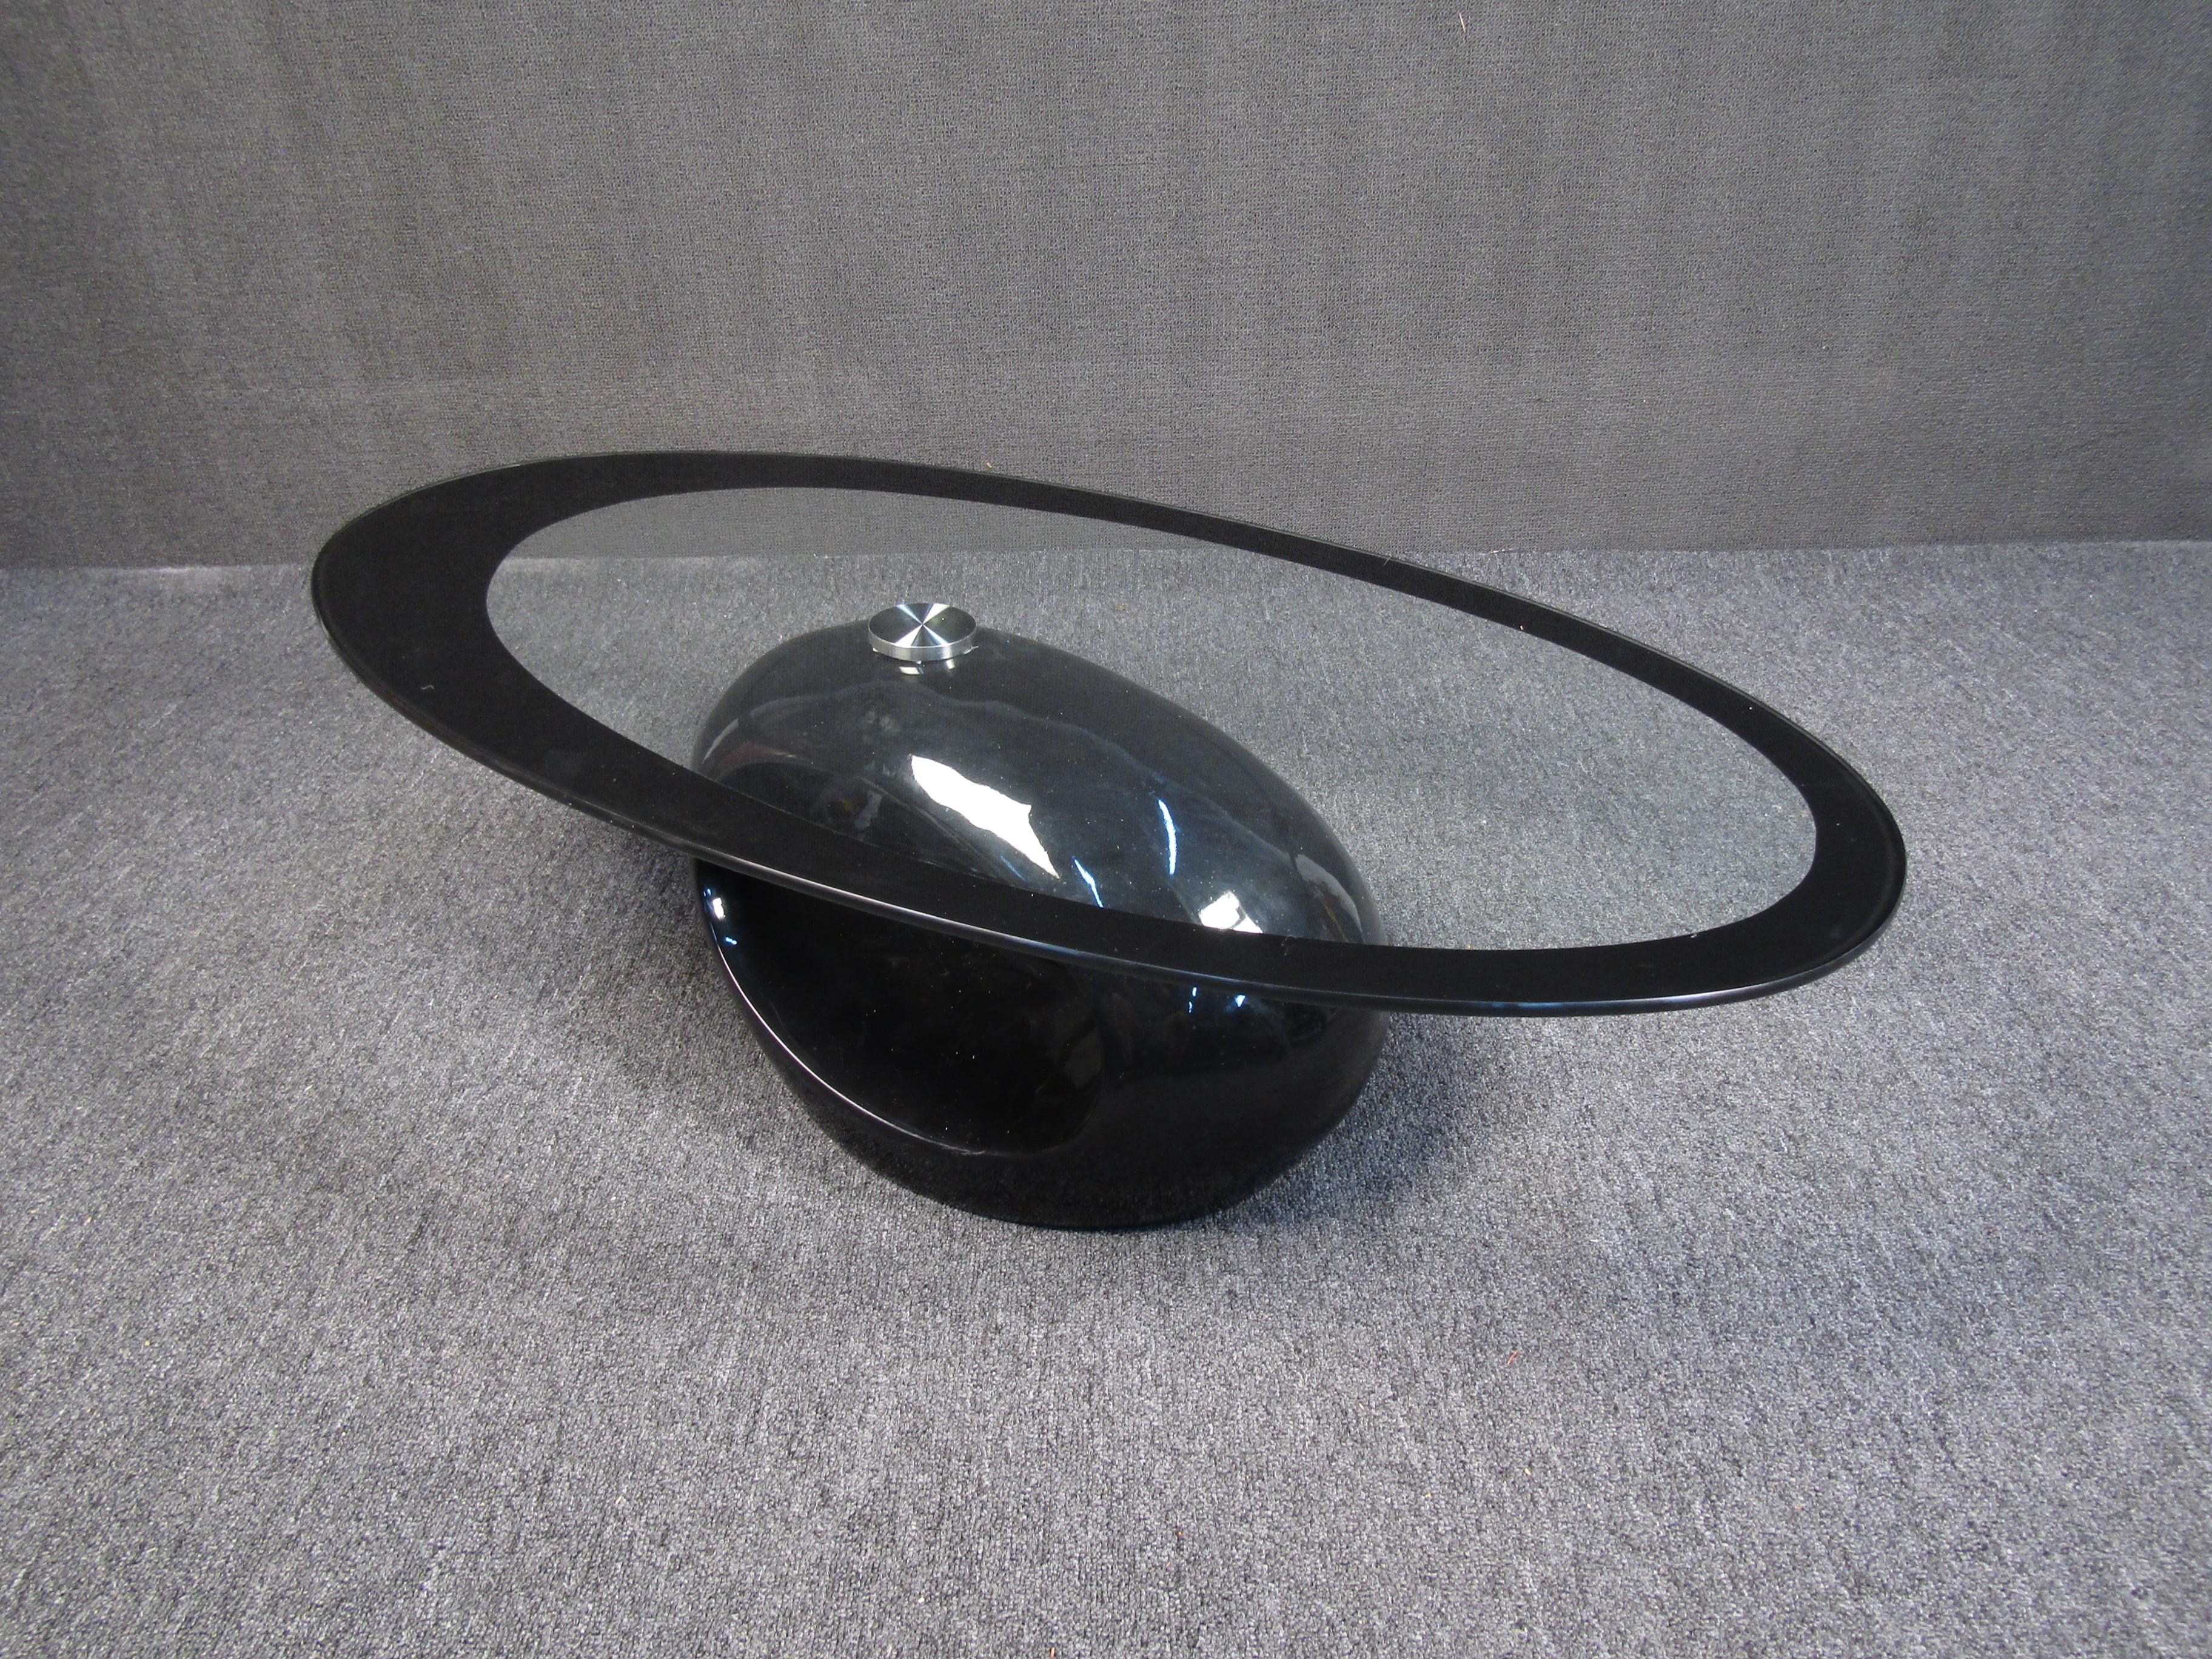 A highly unusual vintage coffee table that is sure to wow with its geometric rounded forms. A transparent glass top is accented by the tabletop's glossy black frame and base. Please confirm item location with seller (NY or NJ).